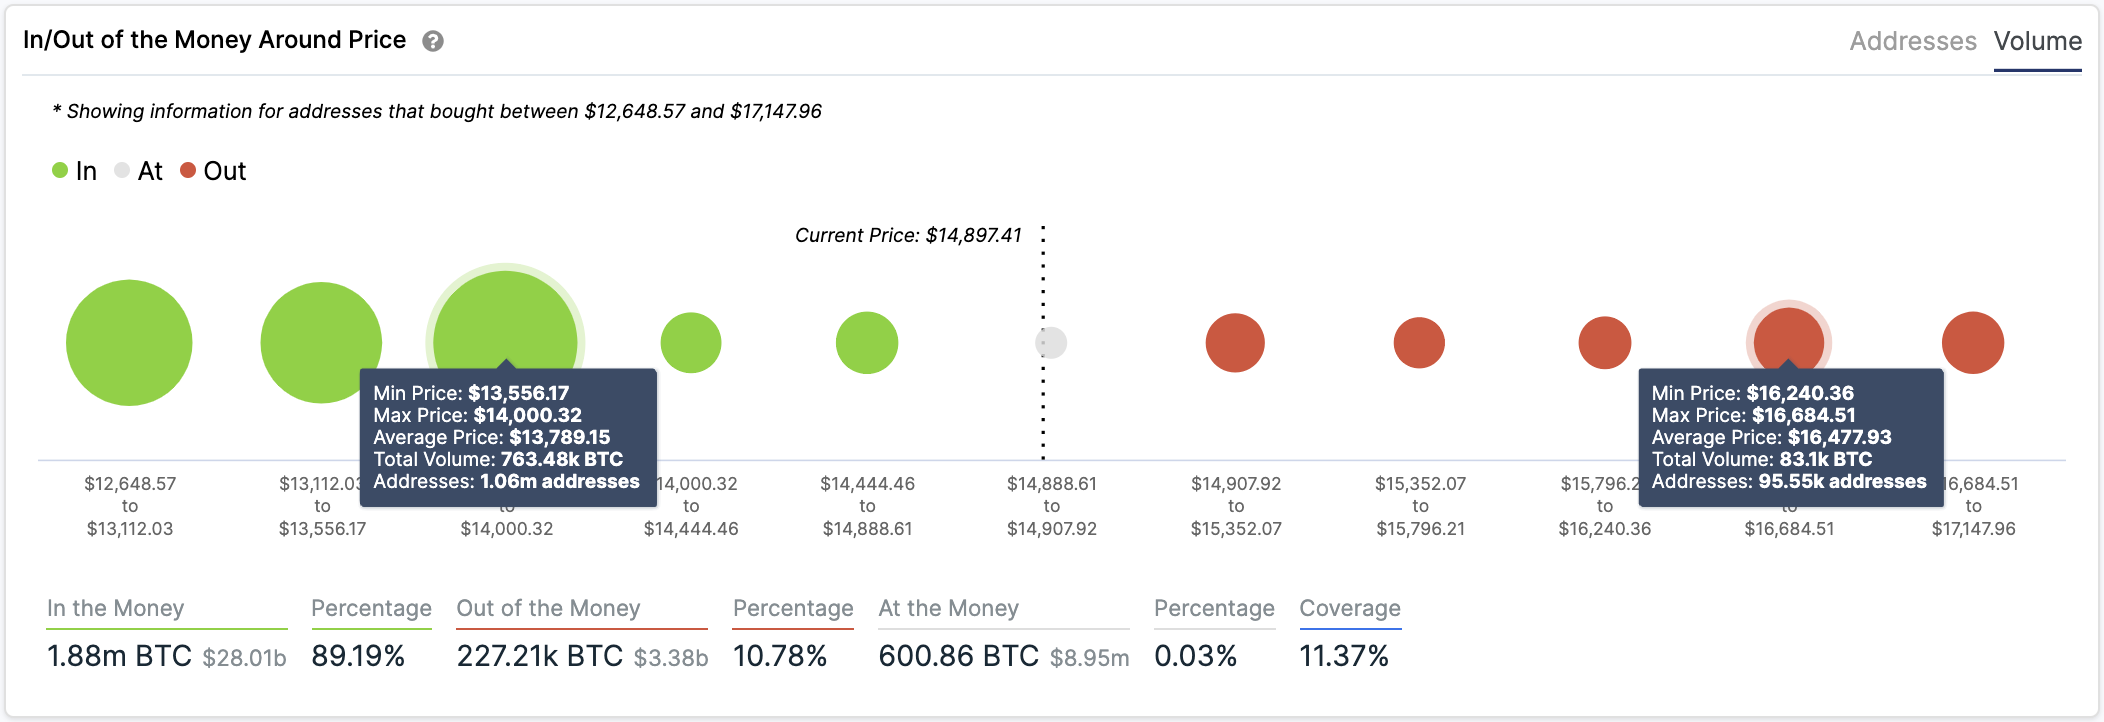 BTC In/Out of the Money Around Price by IntoTheBlock